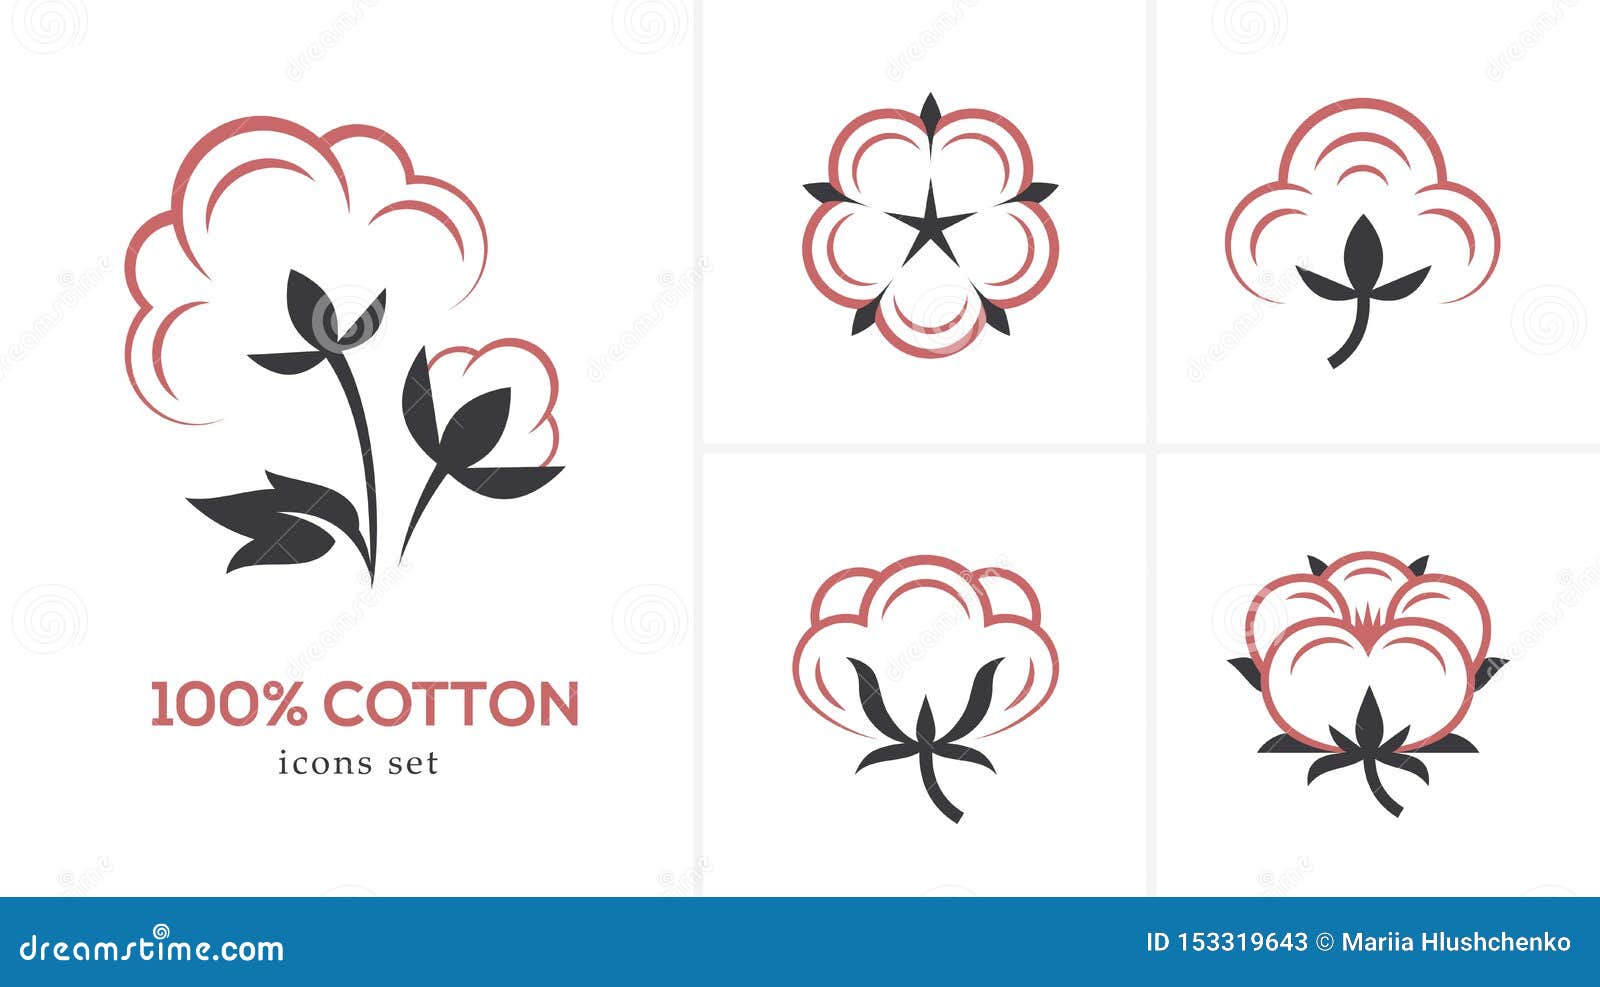 Linear cotton icon set stock vector. Illustration of leaf - 153319643